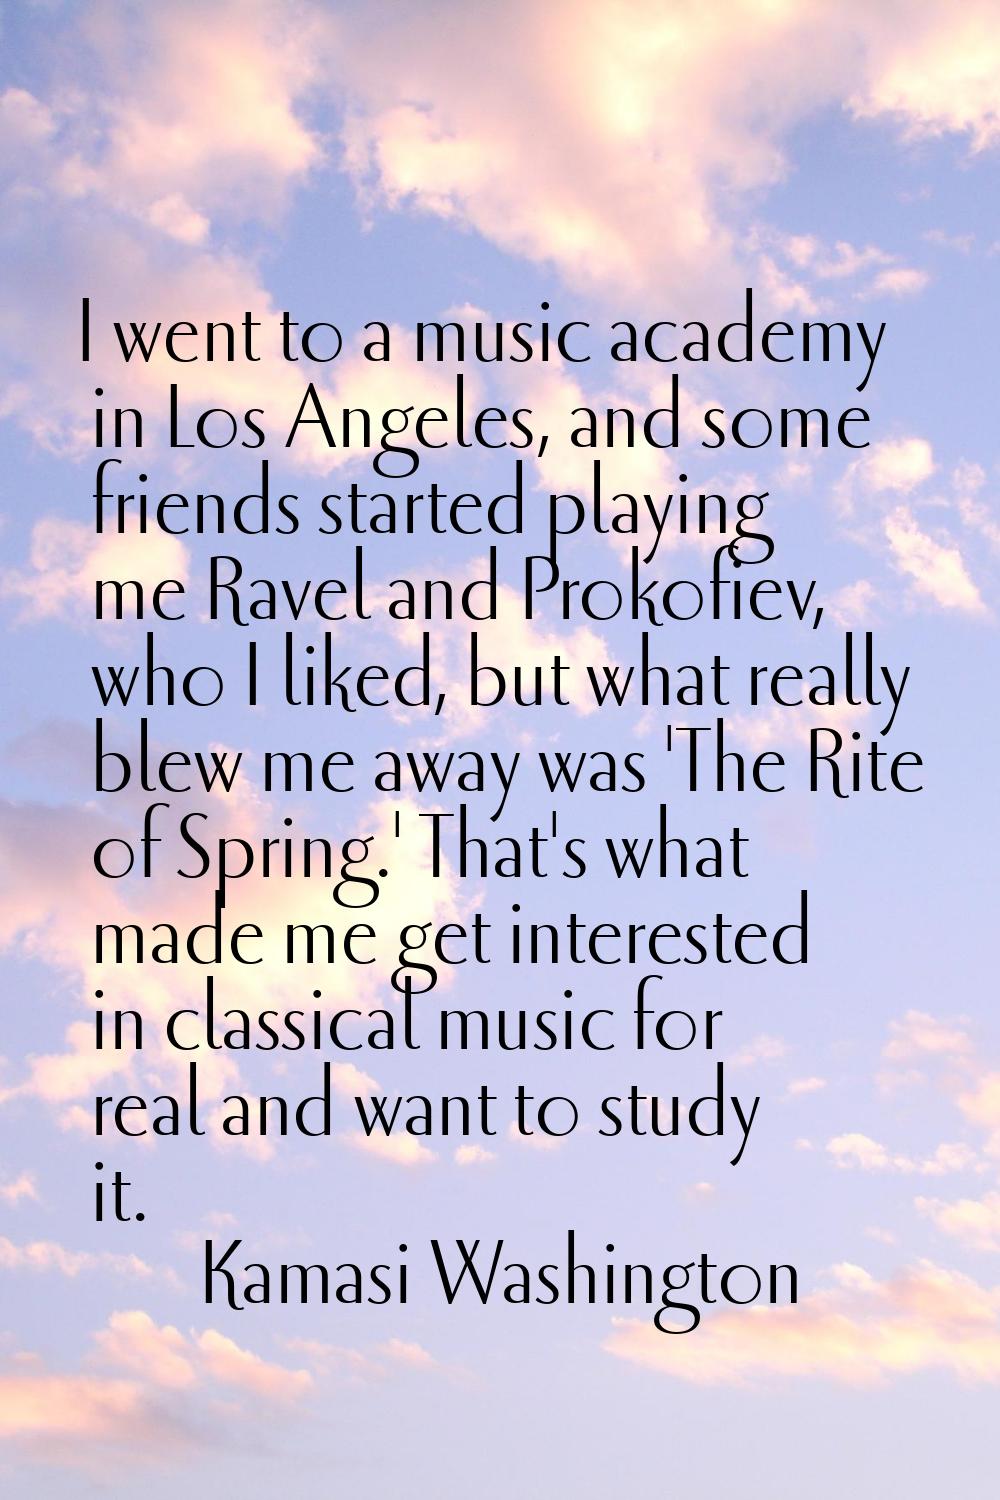 I went to a music academy in Los Angeles, and some friends started playing me Ravel and Prokofiev, 